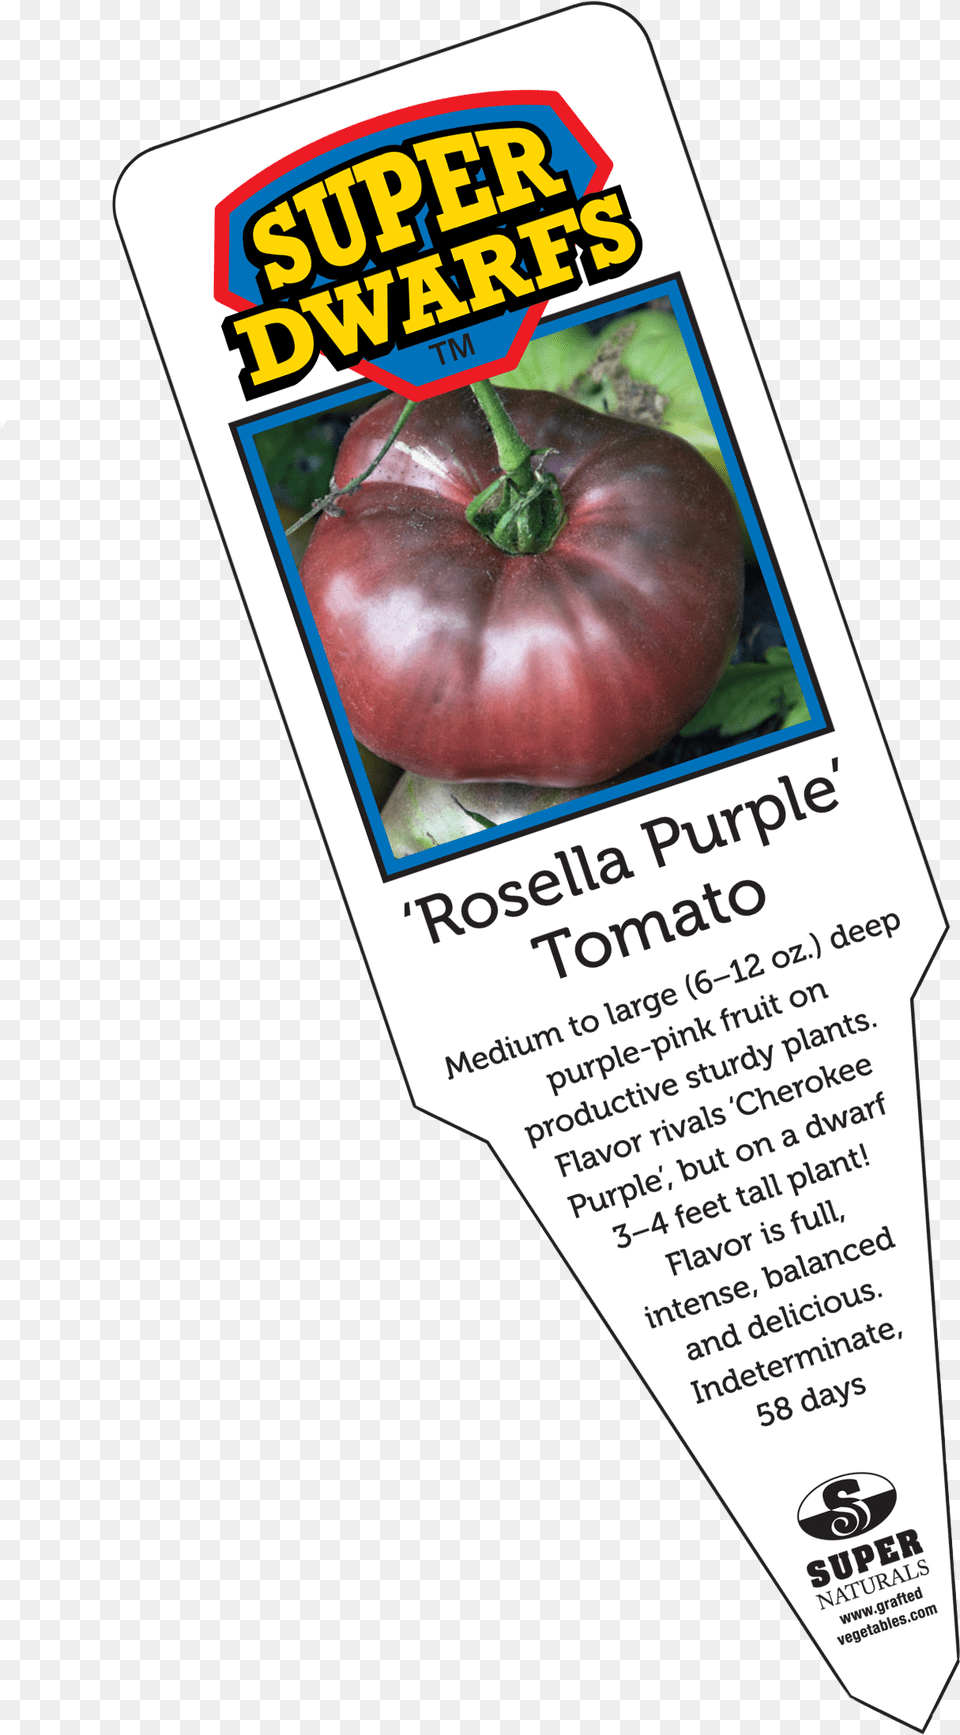 Rosella Purple Tomato Label Natural Foods, Advertisement, Poster, Food, Produce Png